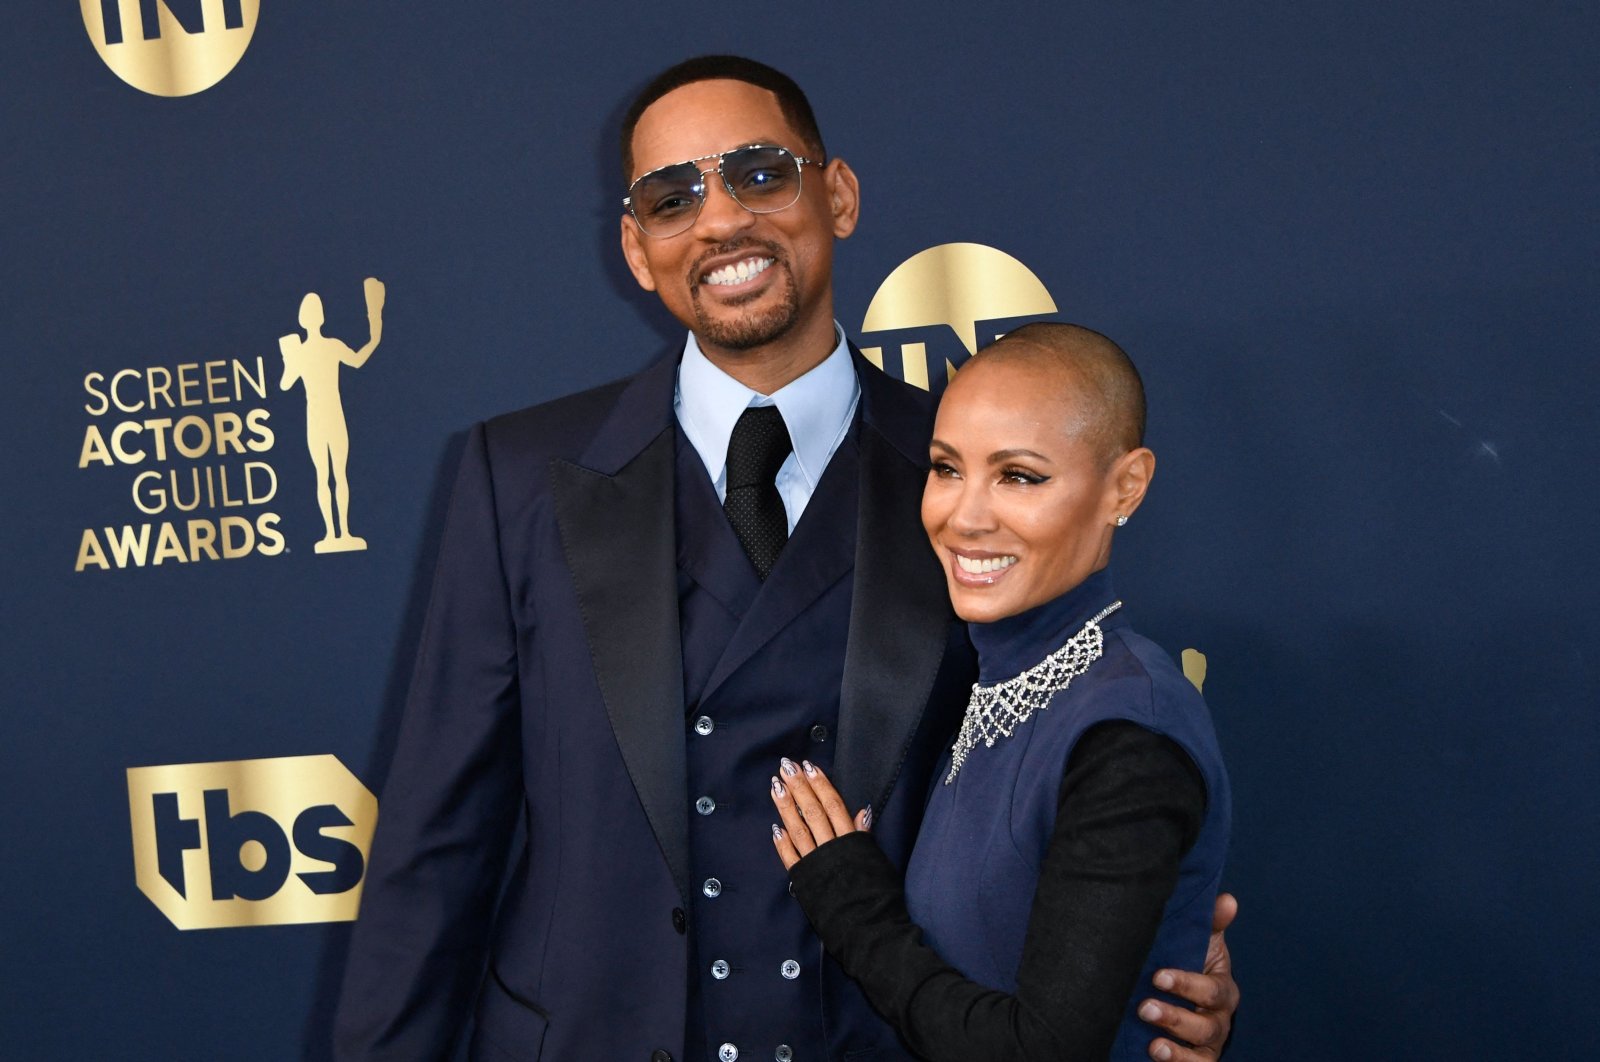 U.S. actor Will Smith and his wife actress Jada Pinkett Smith arrive for the 28th Annual Screen Actors Guild (SAG) Awards at the Barker Hangar in Santa Monica, California, U.S., Feb. 27, 2022. (AFP Photo)